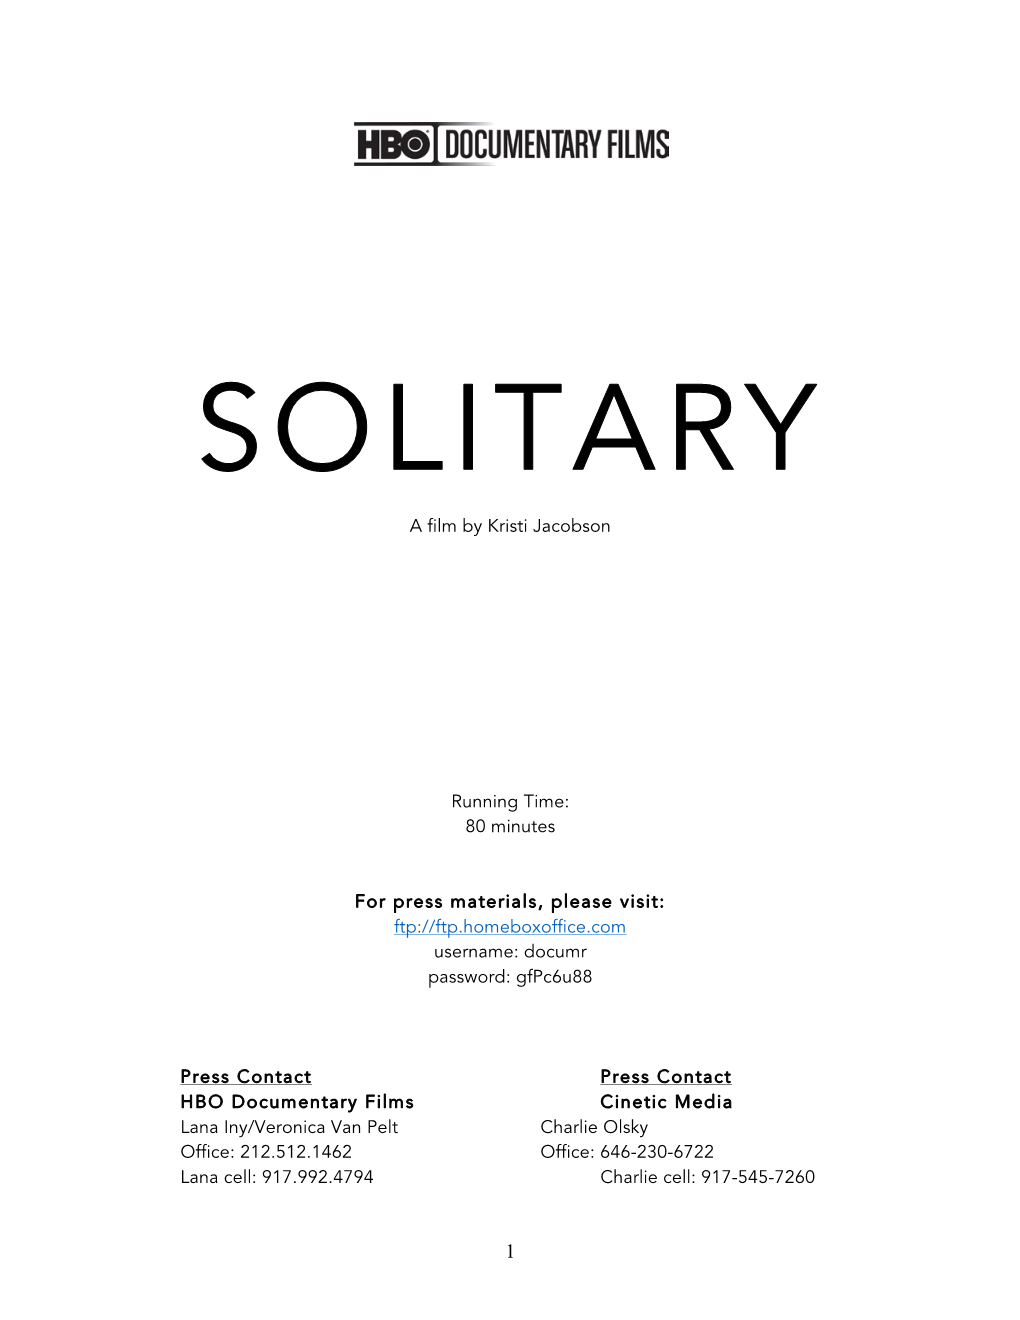 SOLITARY a Film by Kristi Jacobson